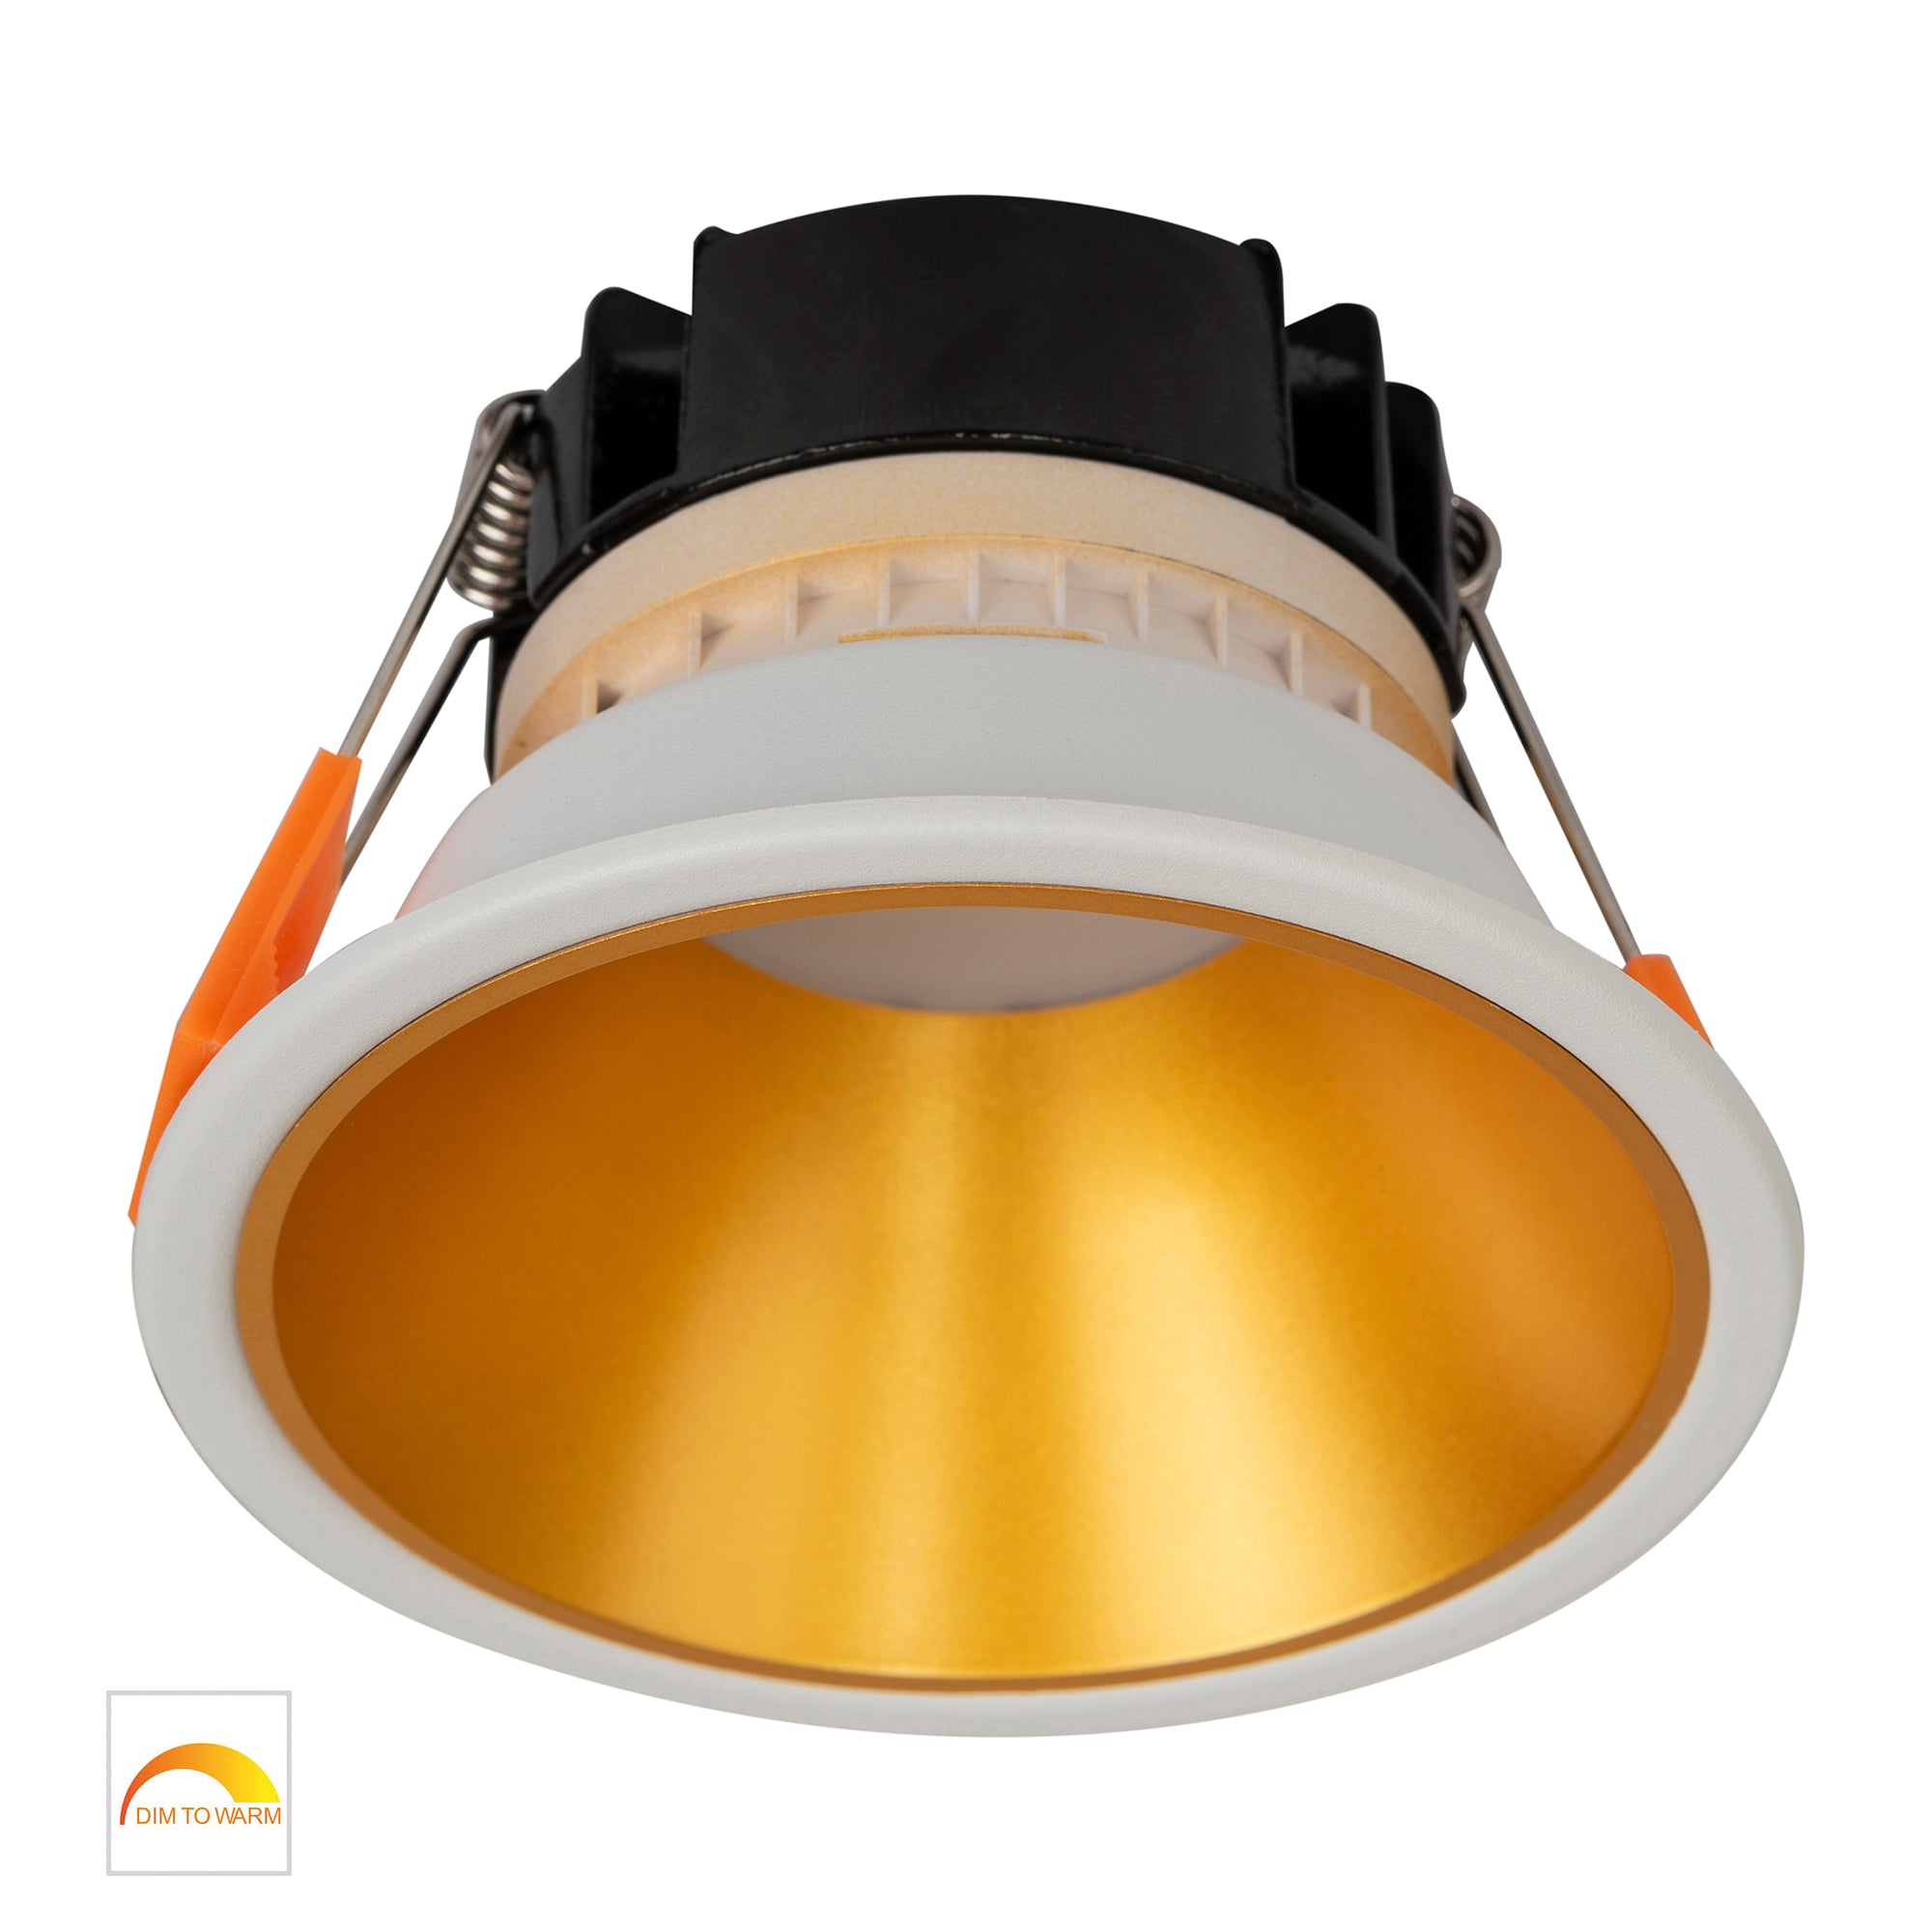 HV5528D2W-WG - Gleam White with Gold Insert Fixed Dim to Warm LED Downlight